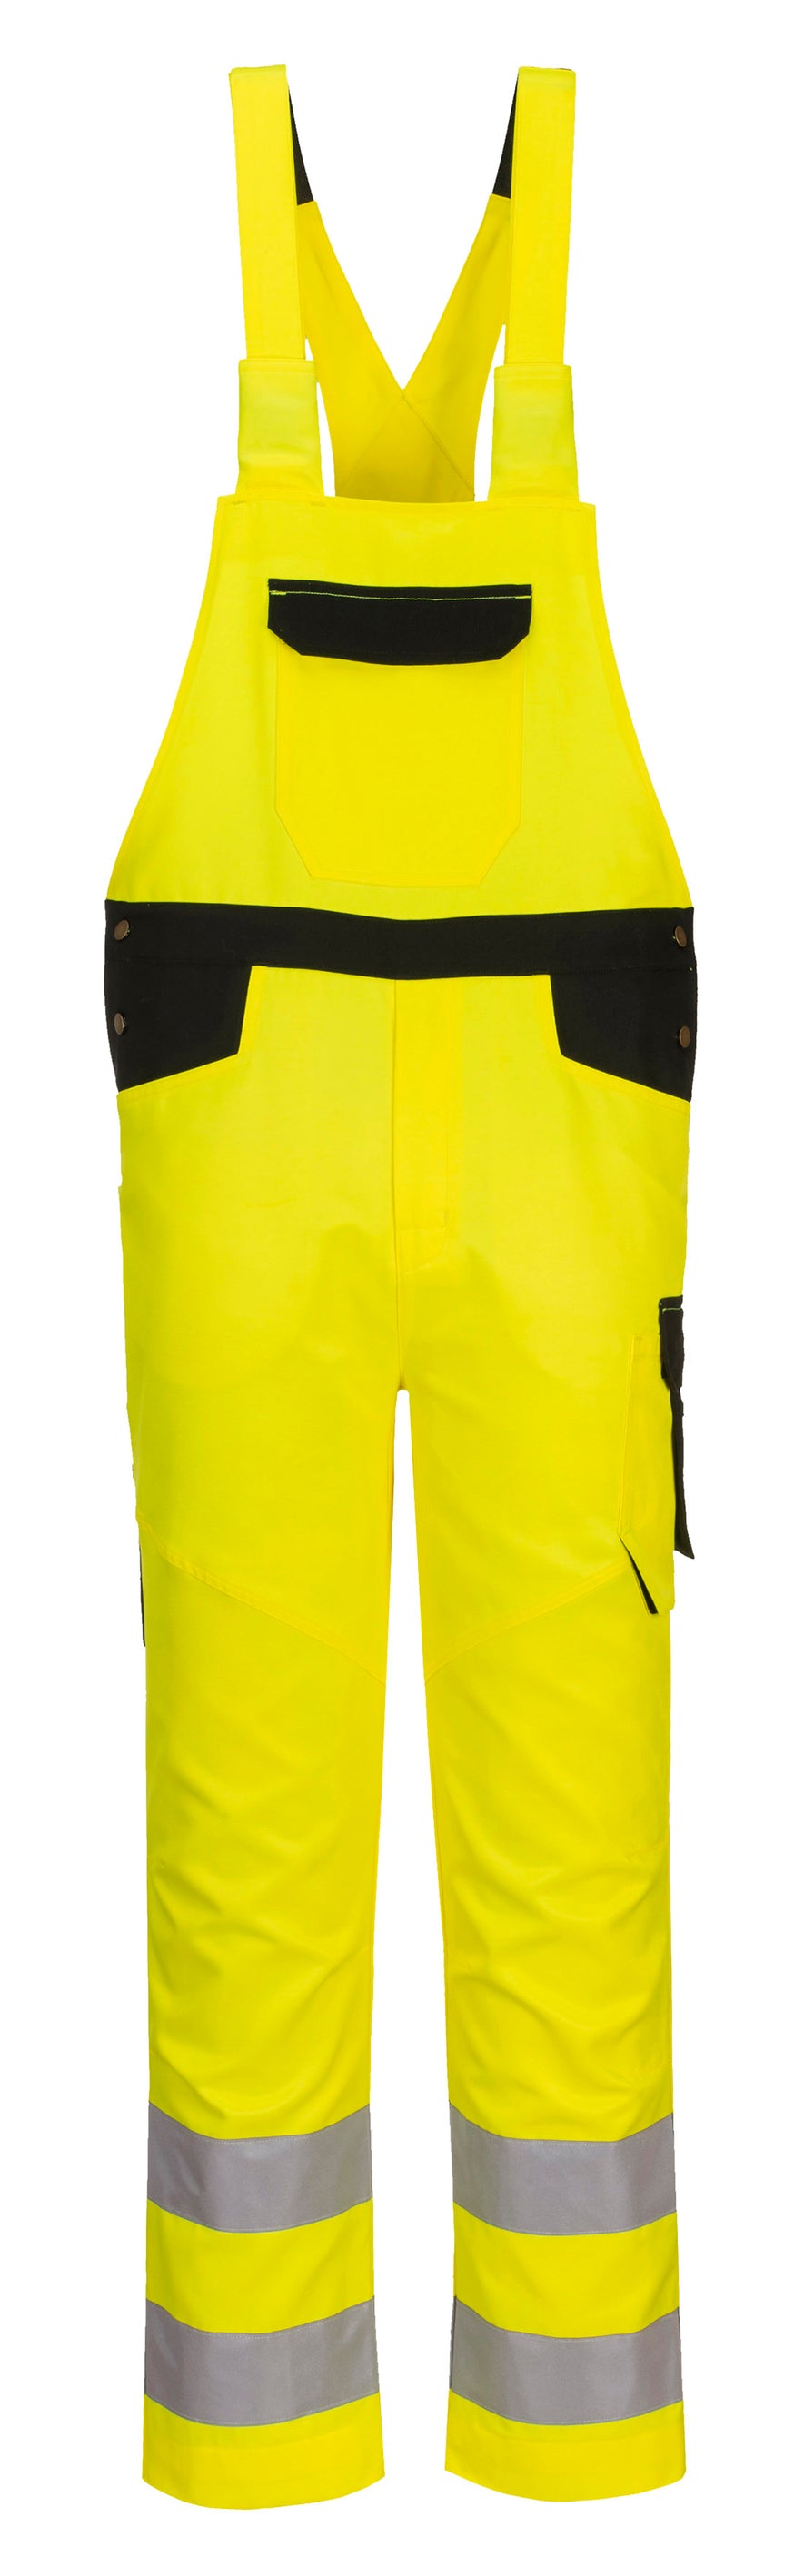 Portwest PW2 Hi-Vis Bib and Brace in yellow with black pocket flap on chest and leg and waistband, shoulder straps, pockets on legs and reflective strips on both legs.